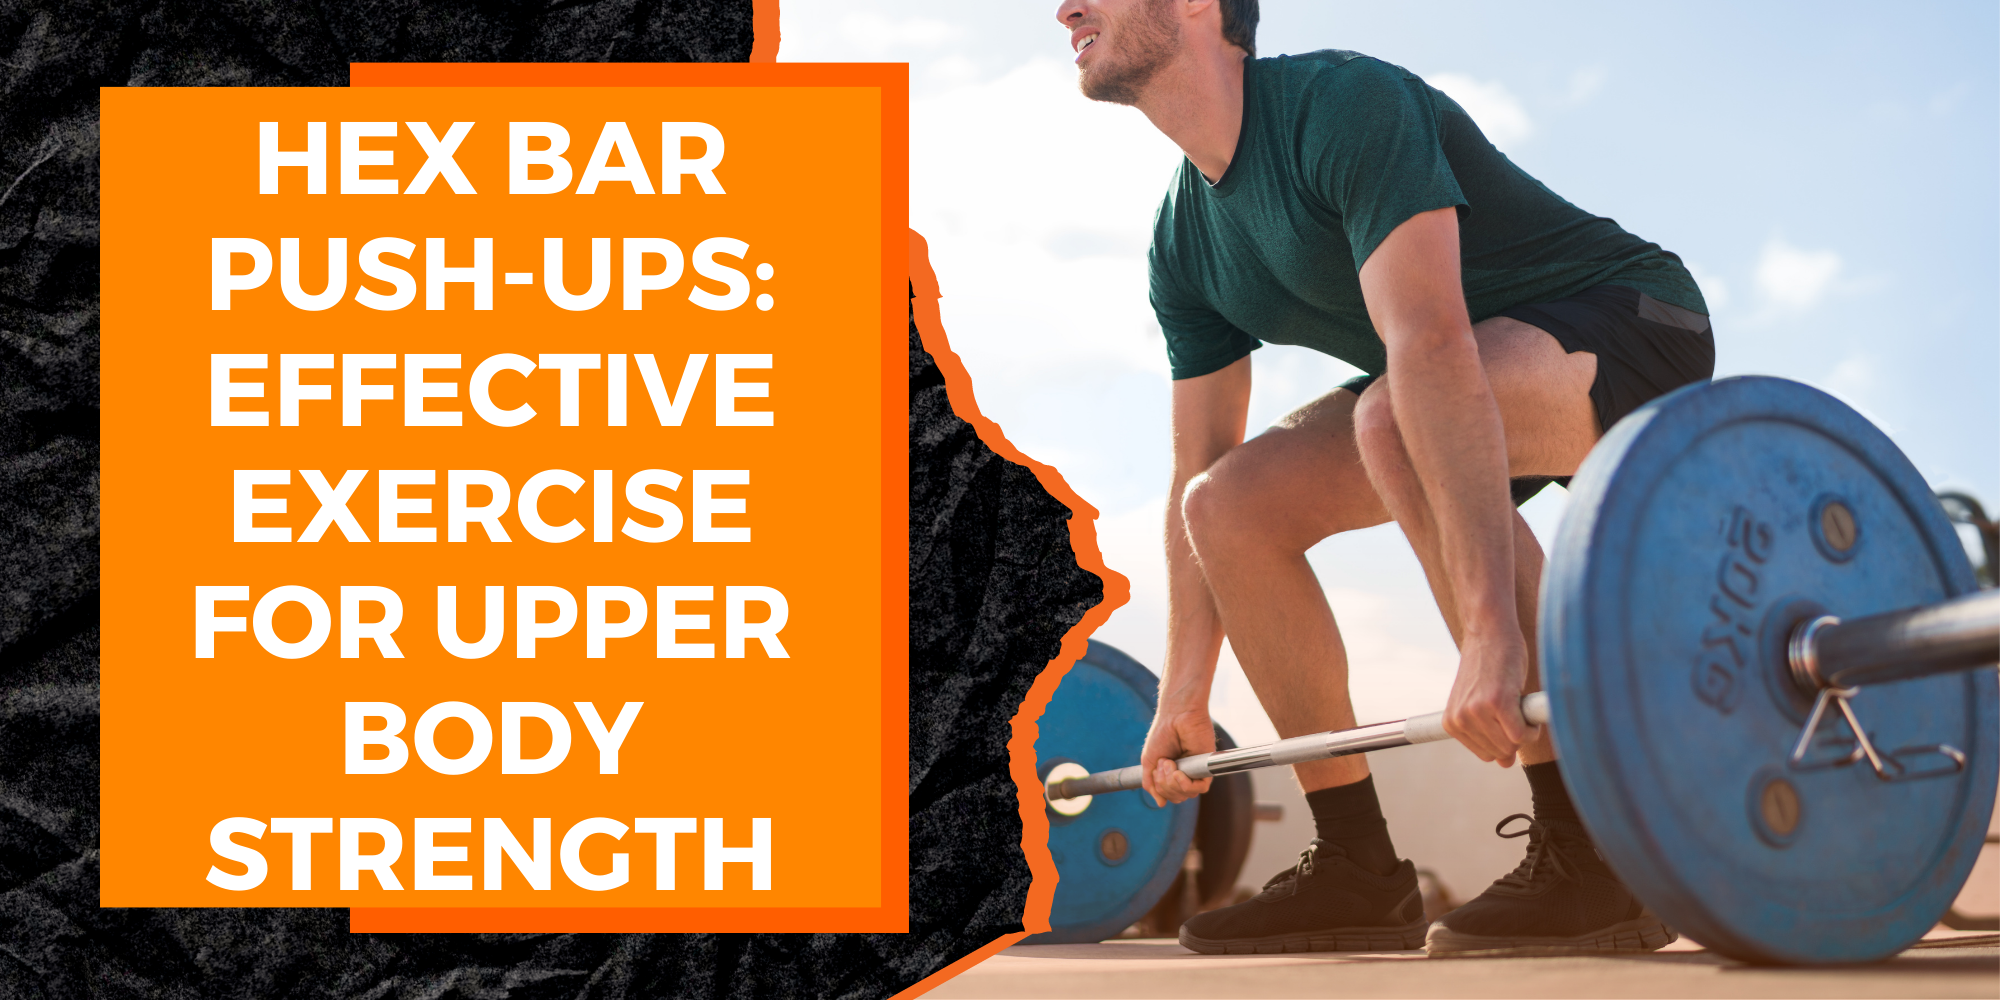 Hex Bar Push-Ups: An Effective Exercise for Developing Upper Body Strength